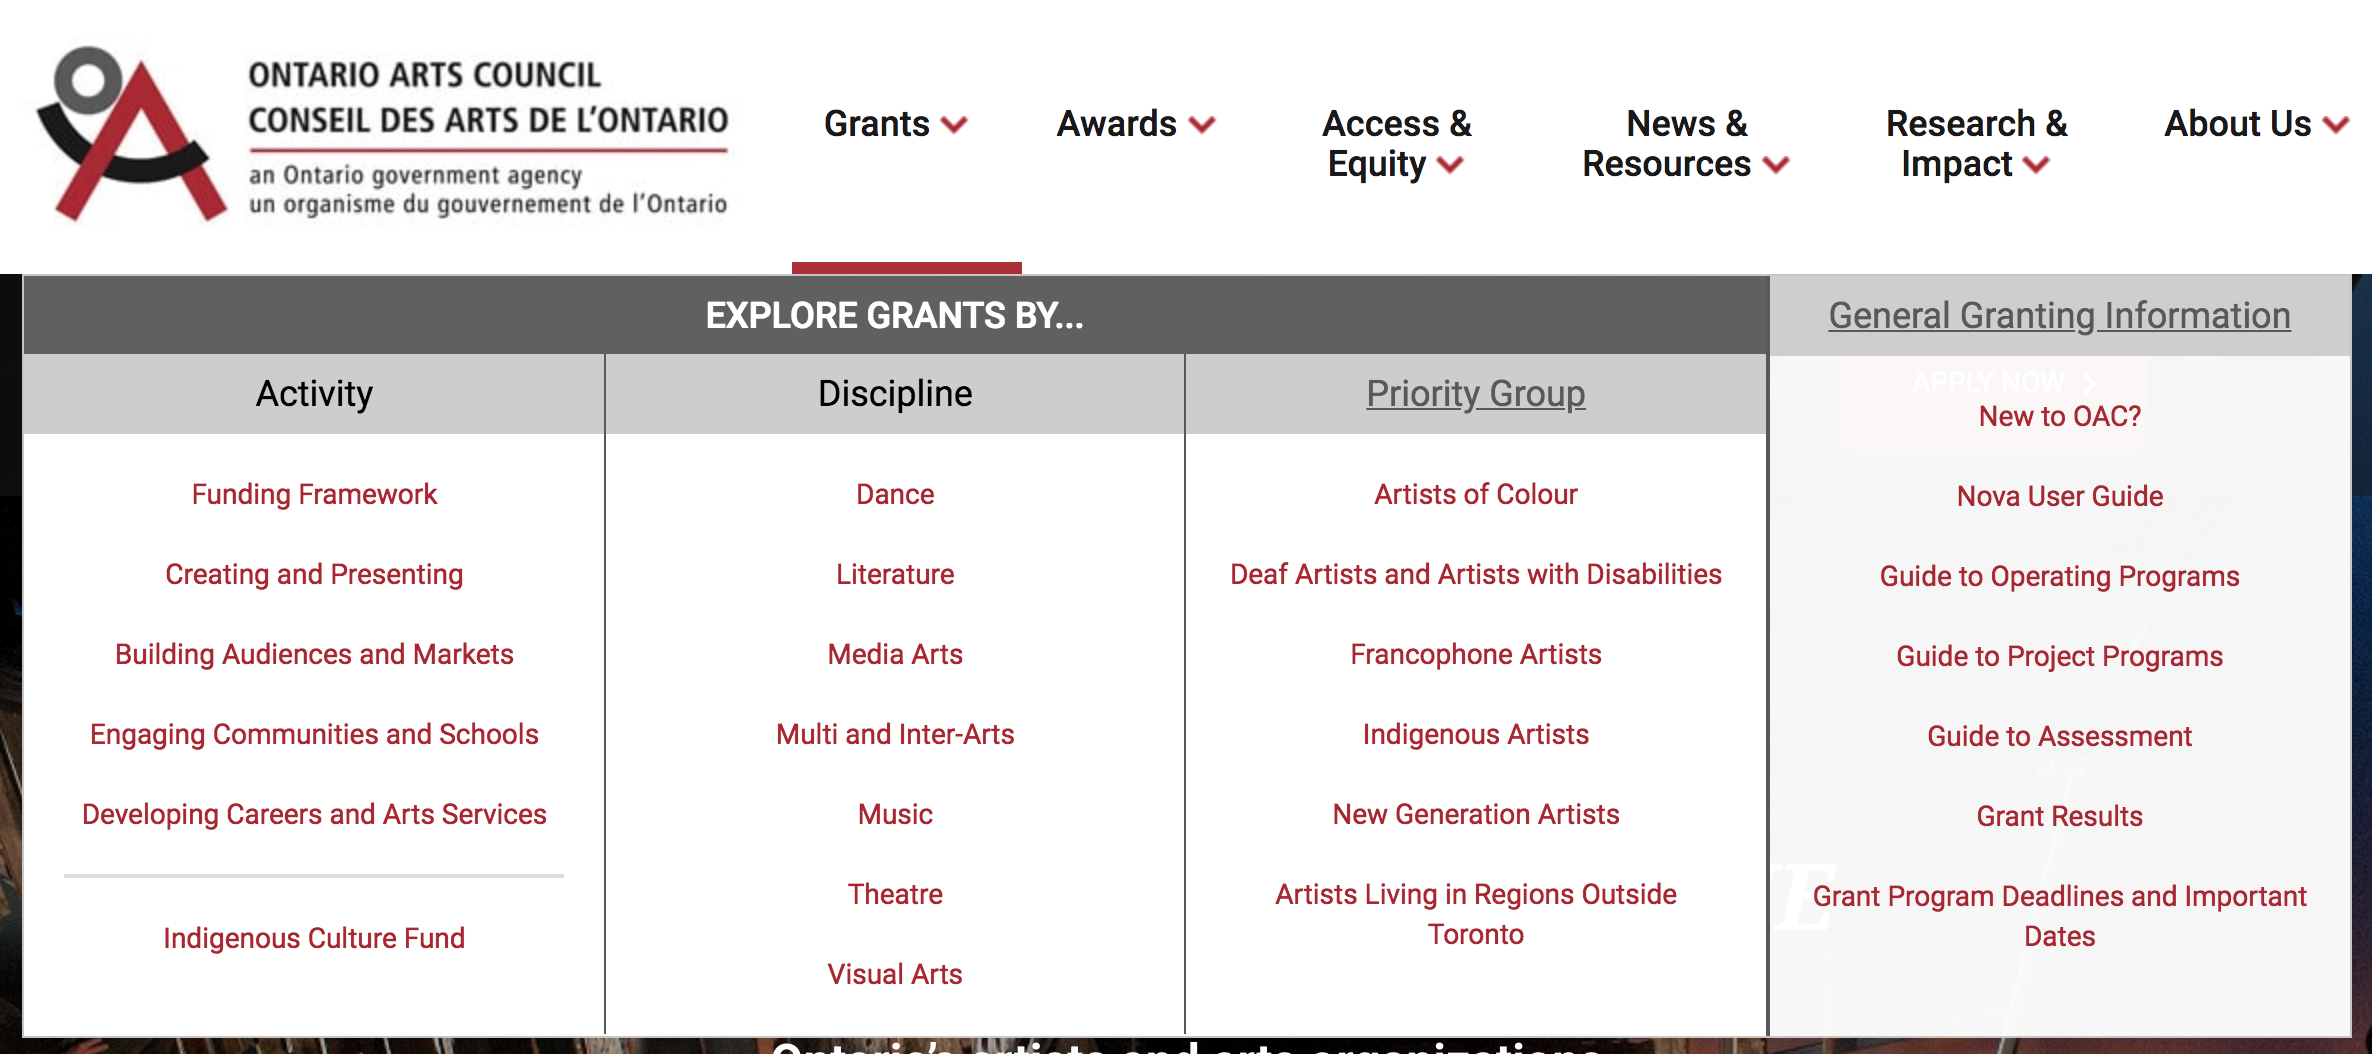 Screenshot of the arts.on.ca website showing the navigation menu for their grant programs. It has four columns, including one for different types of activities, one for artists from different disciplines, one for artists from different priority groups, such as Artists of Colour, and a final column for general information about grants.